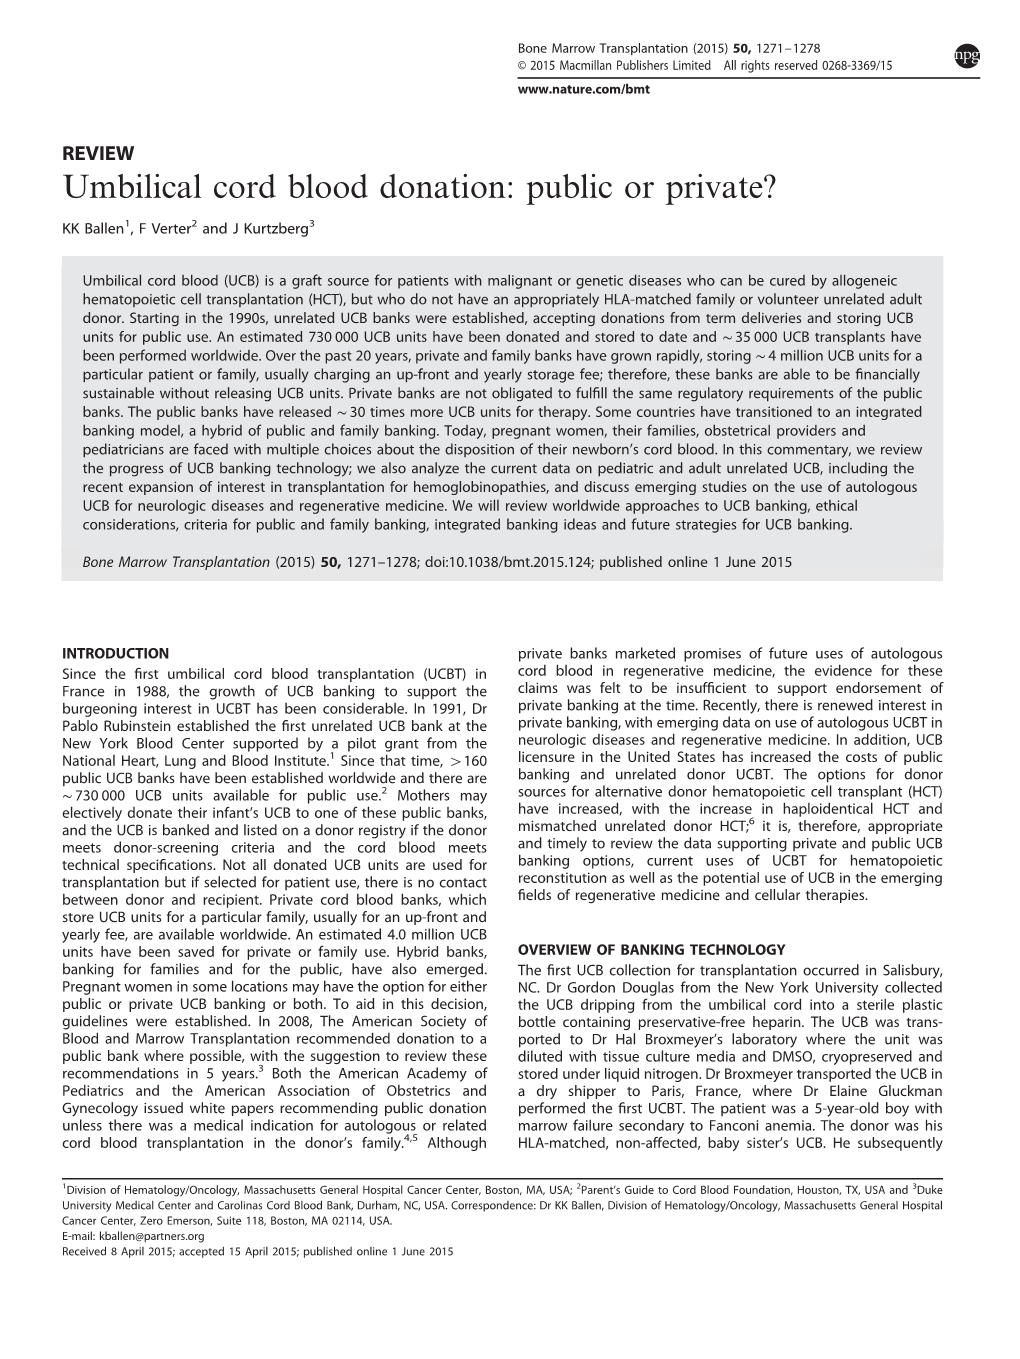 Umbilical Cord Blood Donation: Public Or Private?